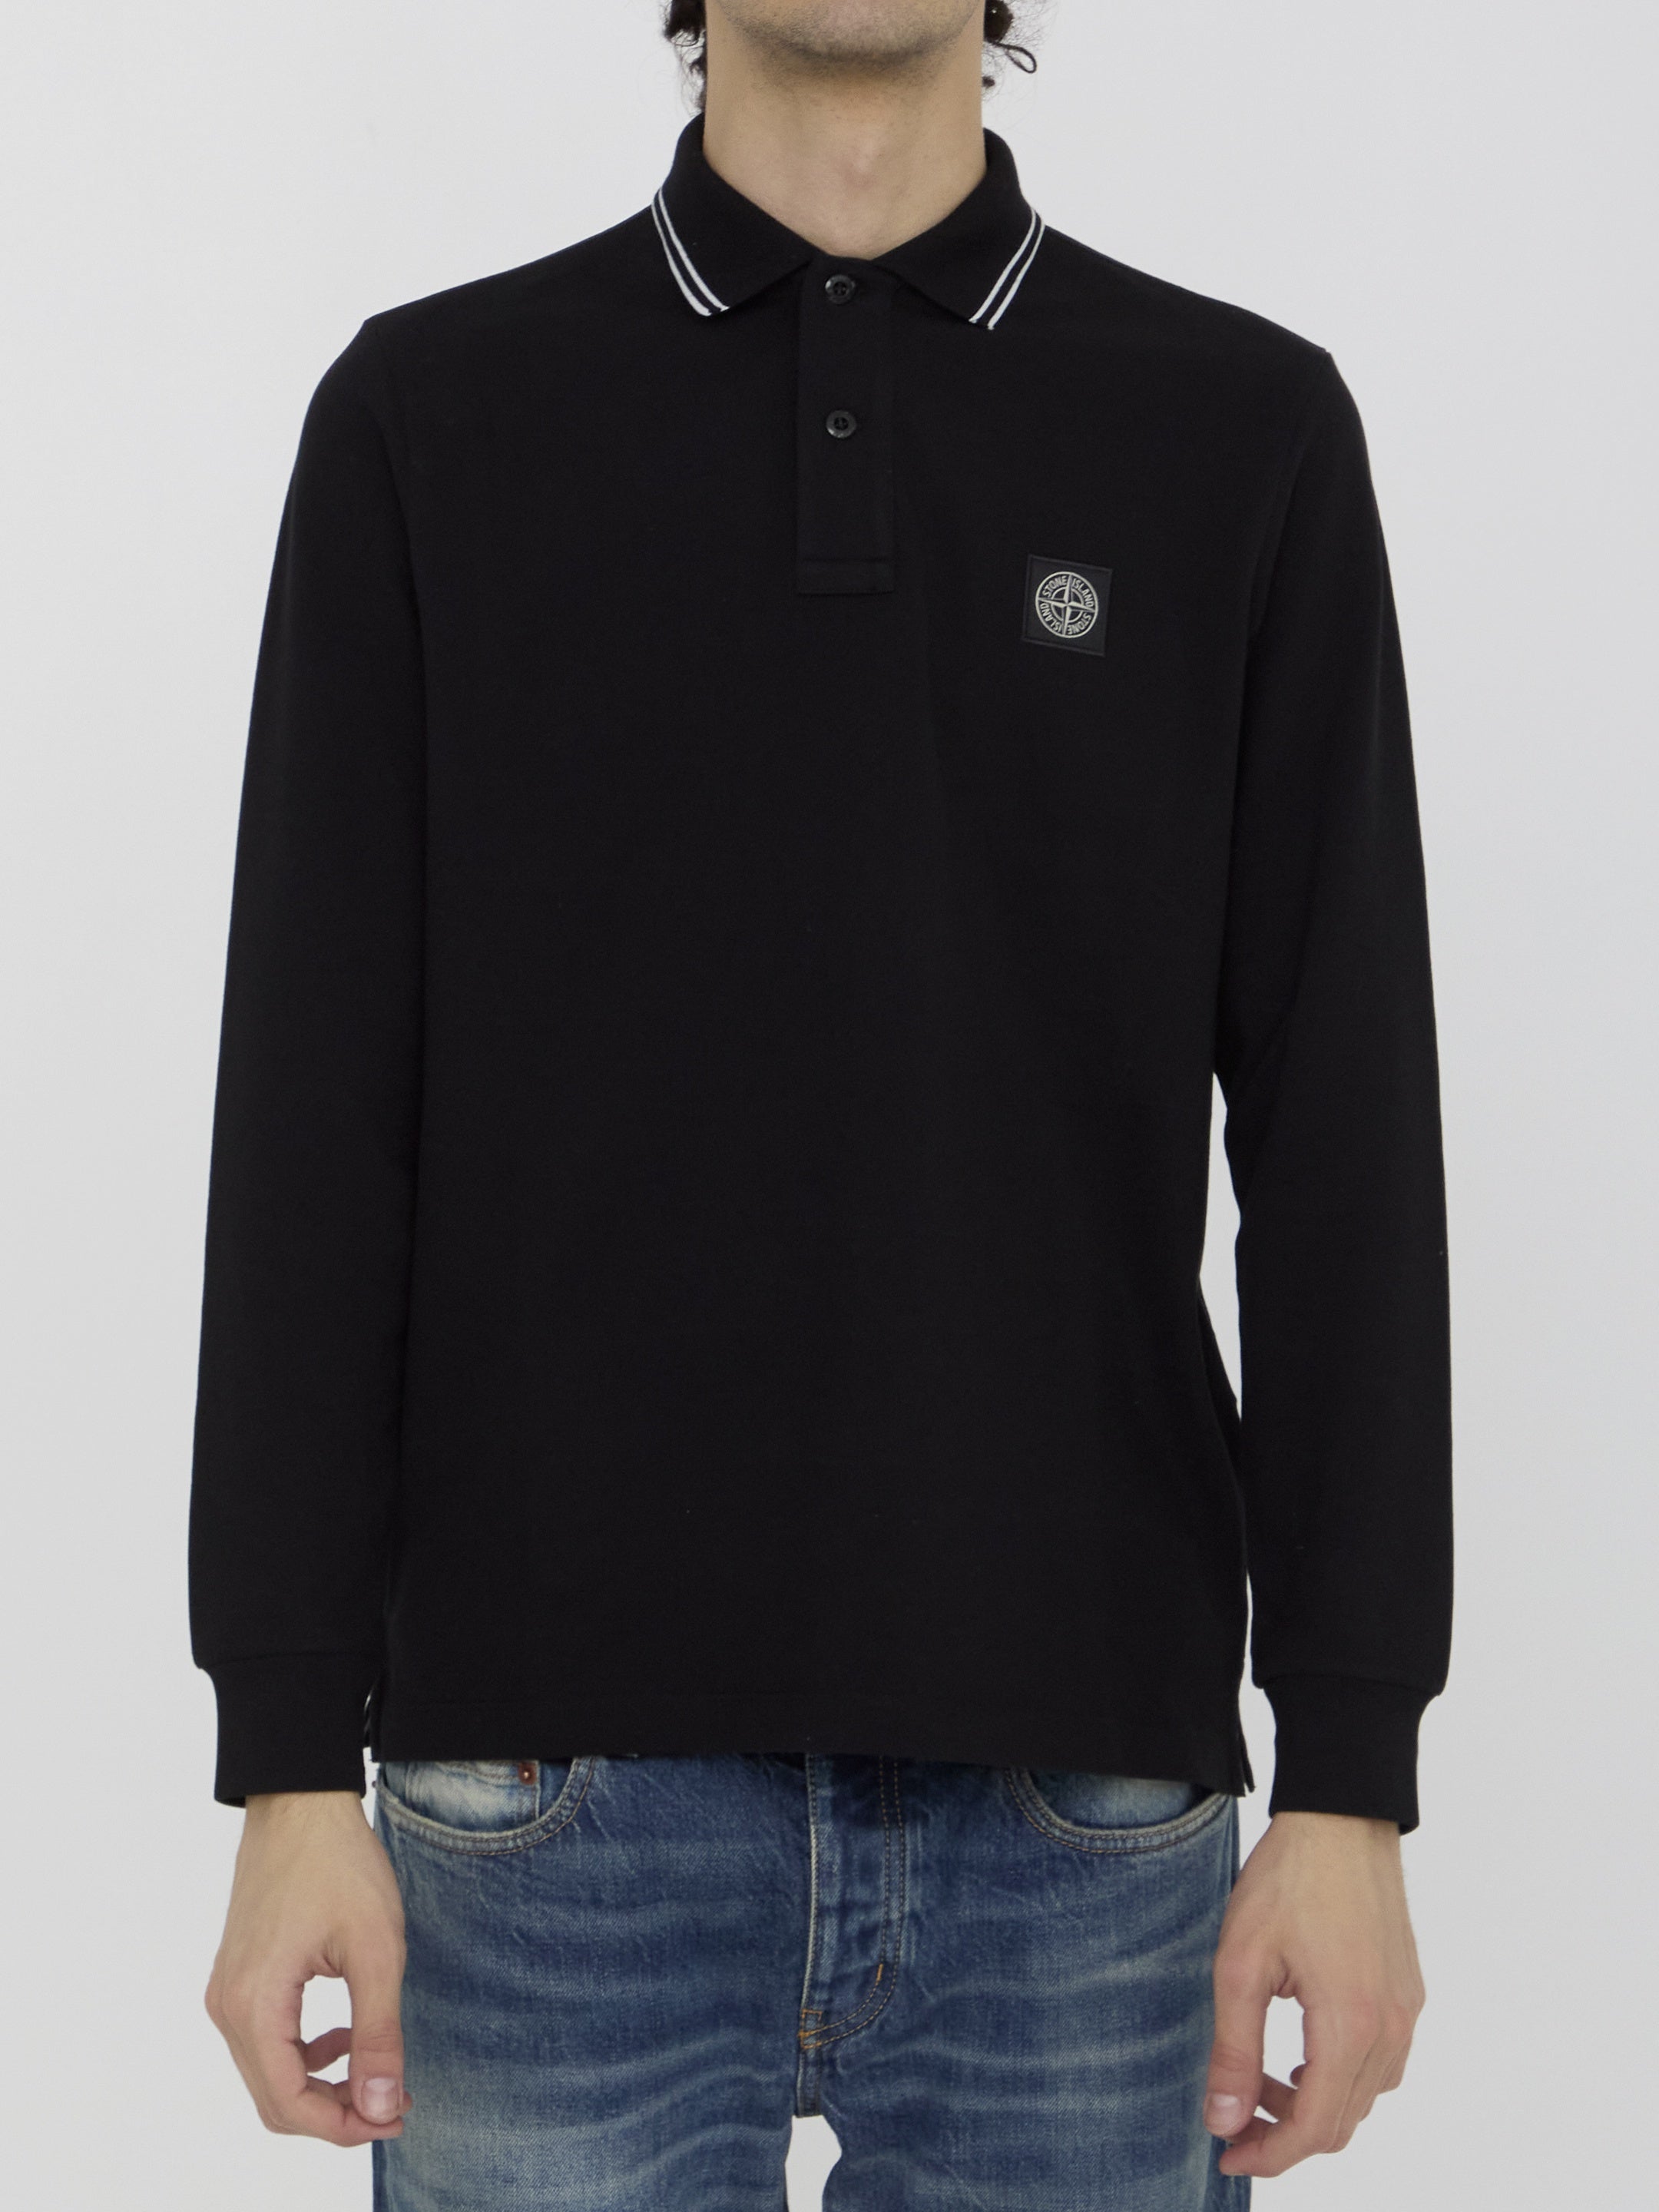 STONE-ISLAND-OUTLET-SALE-Logo-polo-shirt-Shirts-L-BLACK-ARCHIVE-COLLECTION.jpg